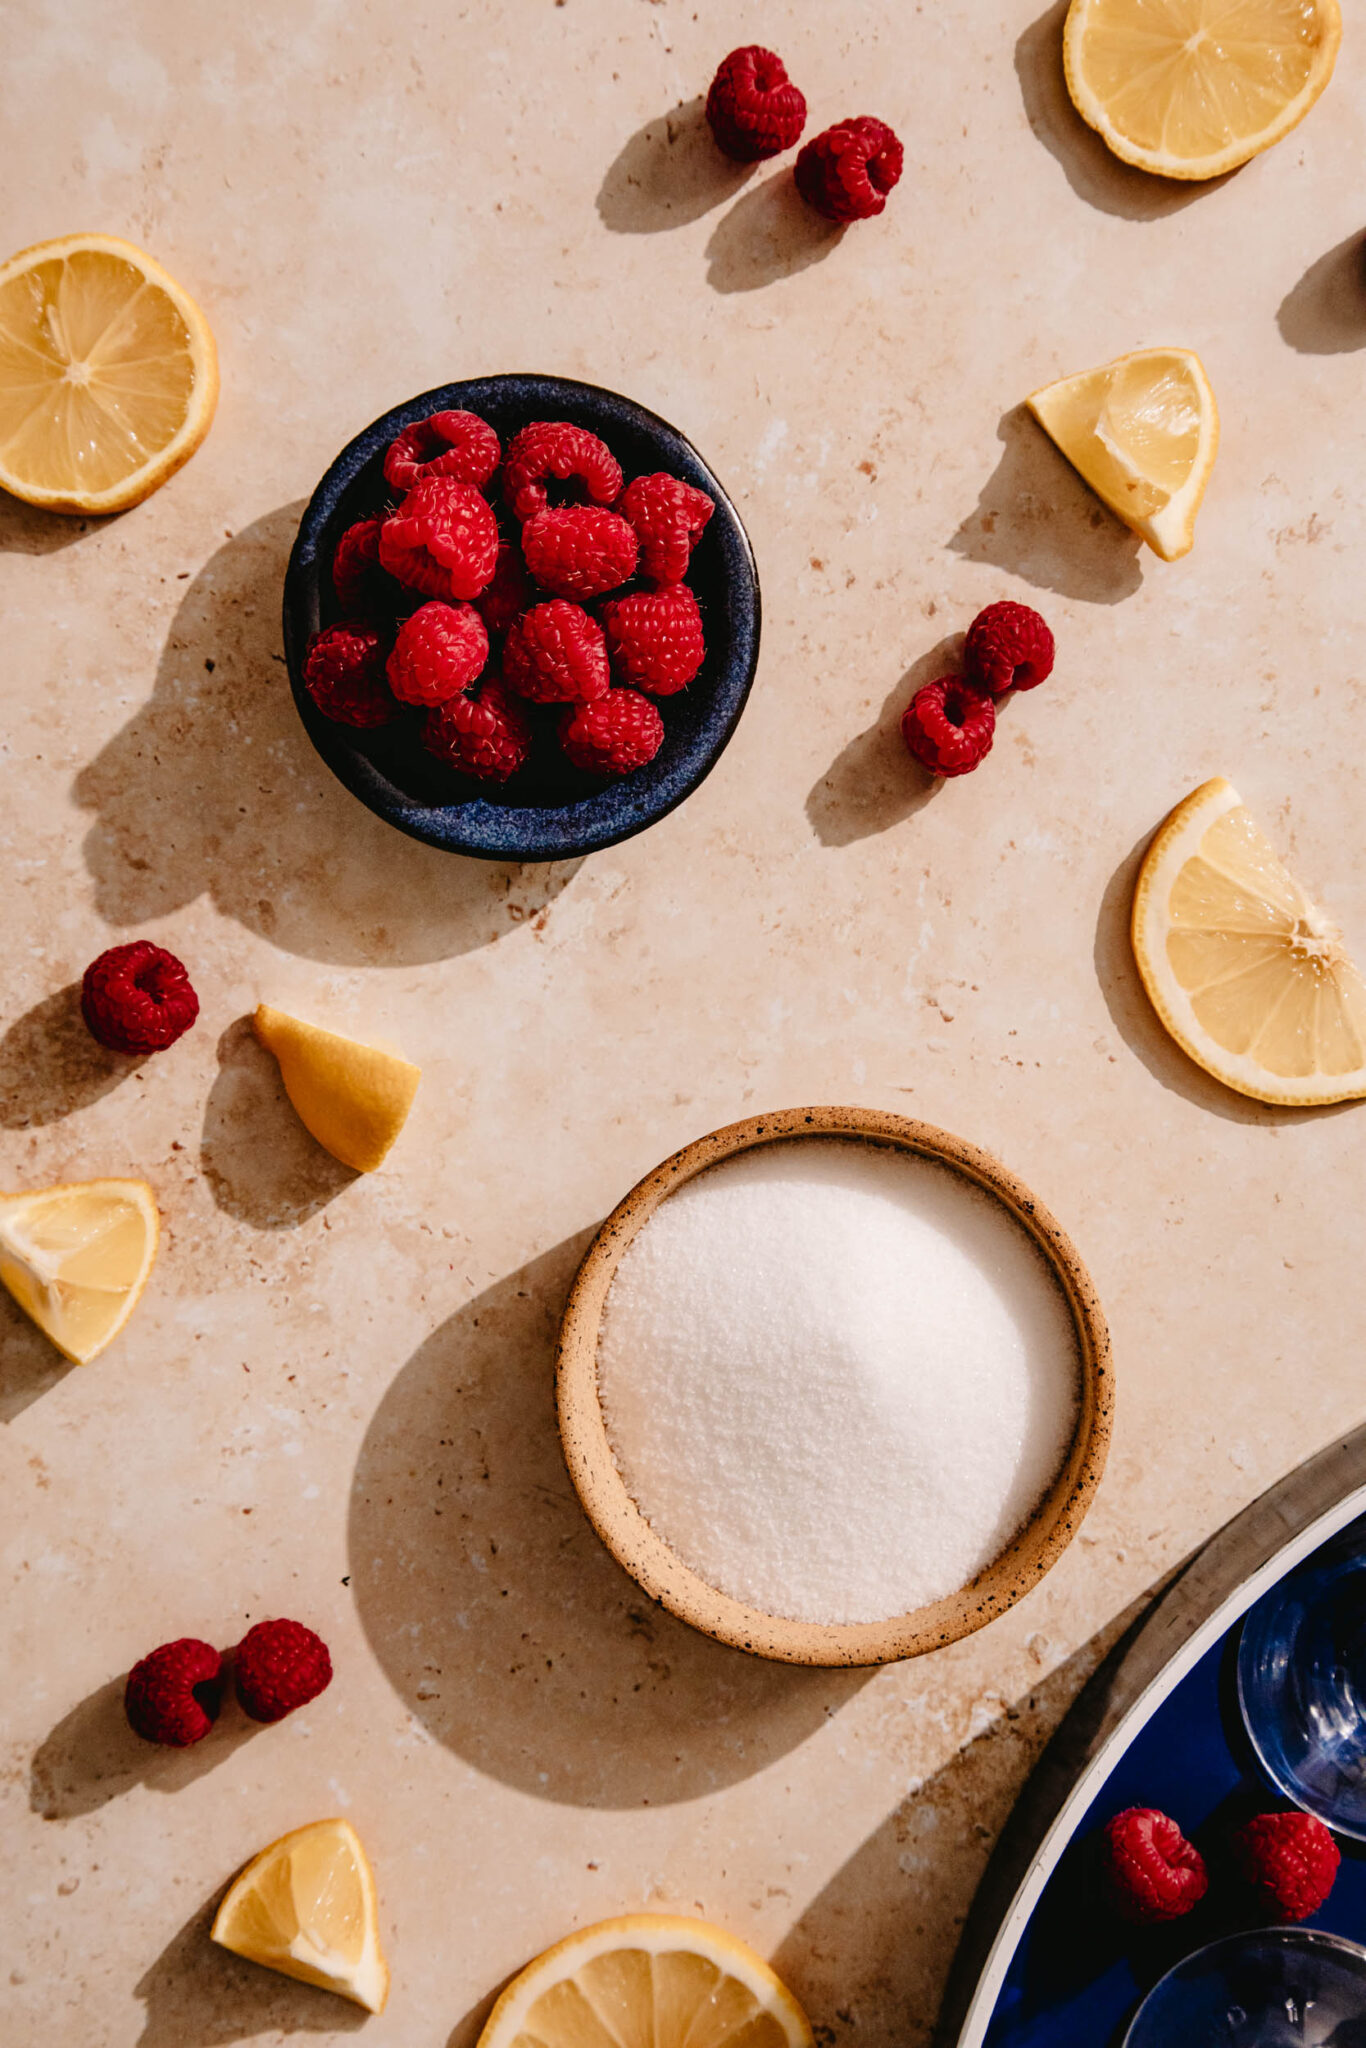 Overhead view of a bowl of granulated sugar and a bowl of fresh raspberries, surrounded by lemon slices.